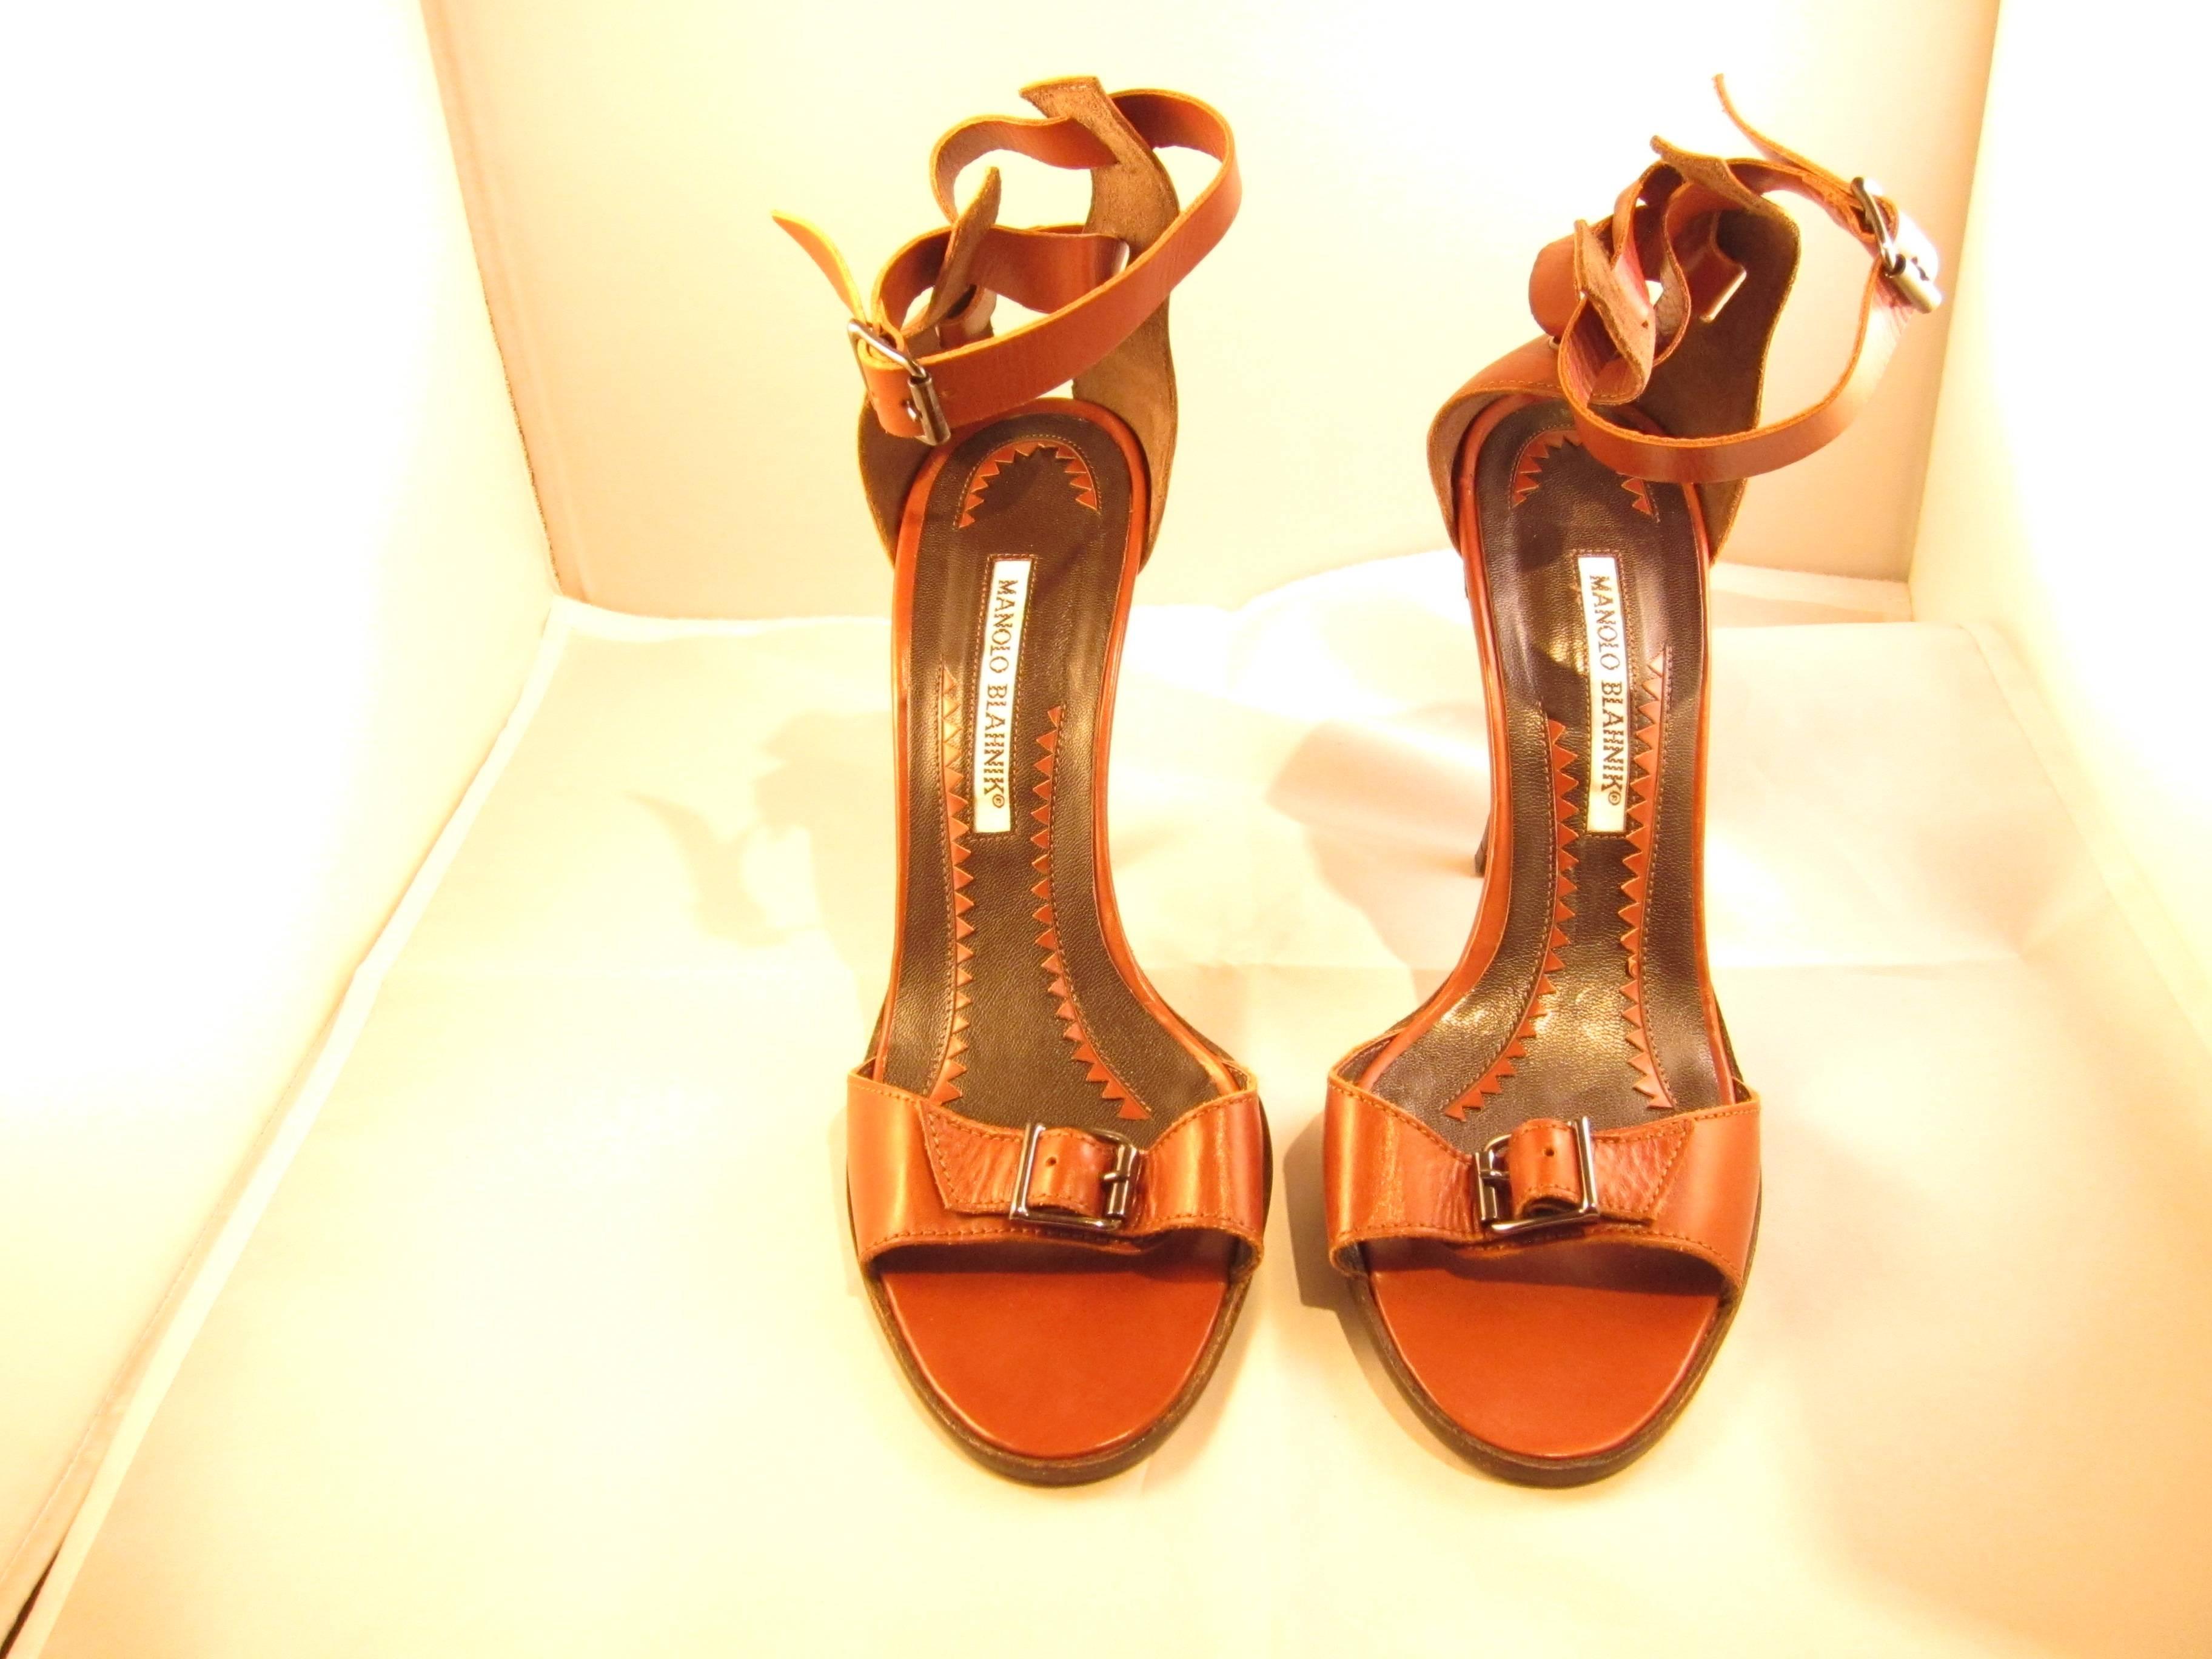 Really nice pair of Manolo Blahnik Sandals in Brown Leather
Size 7,5 (39,5 french)
Heel 10 cm
Good condition, some small signs of wear 